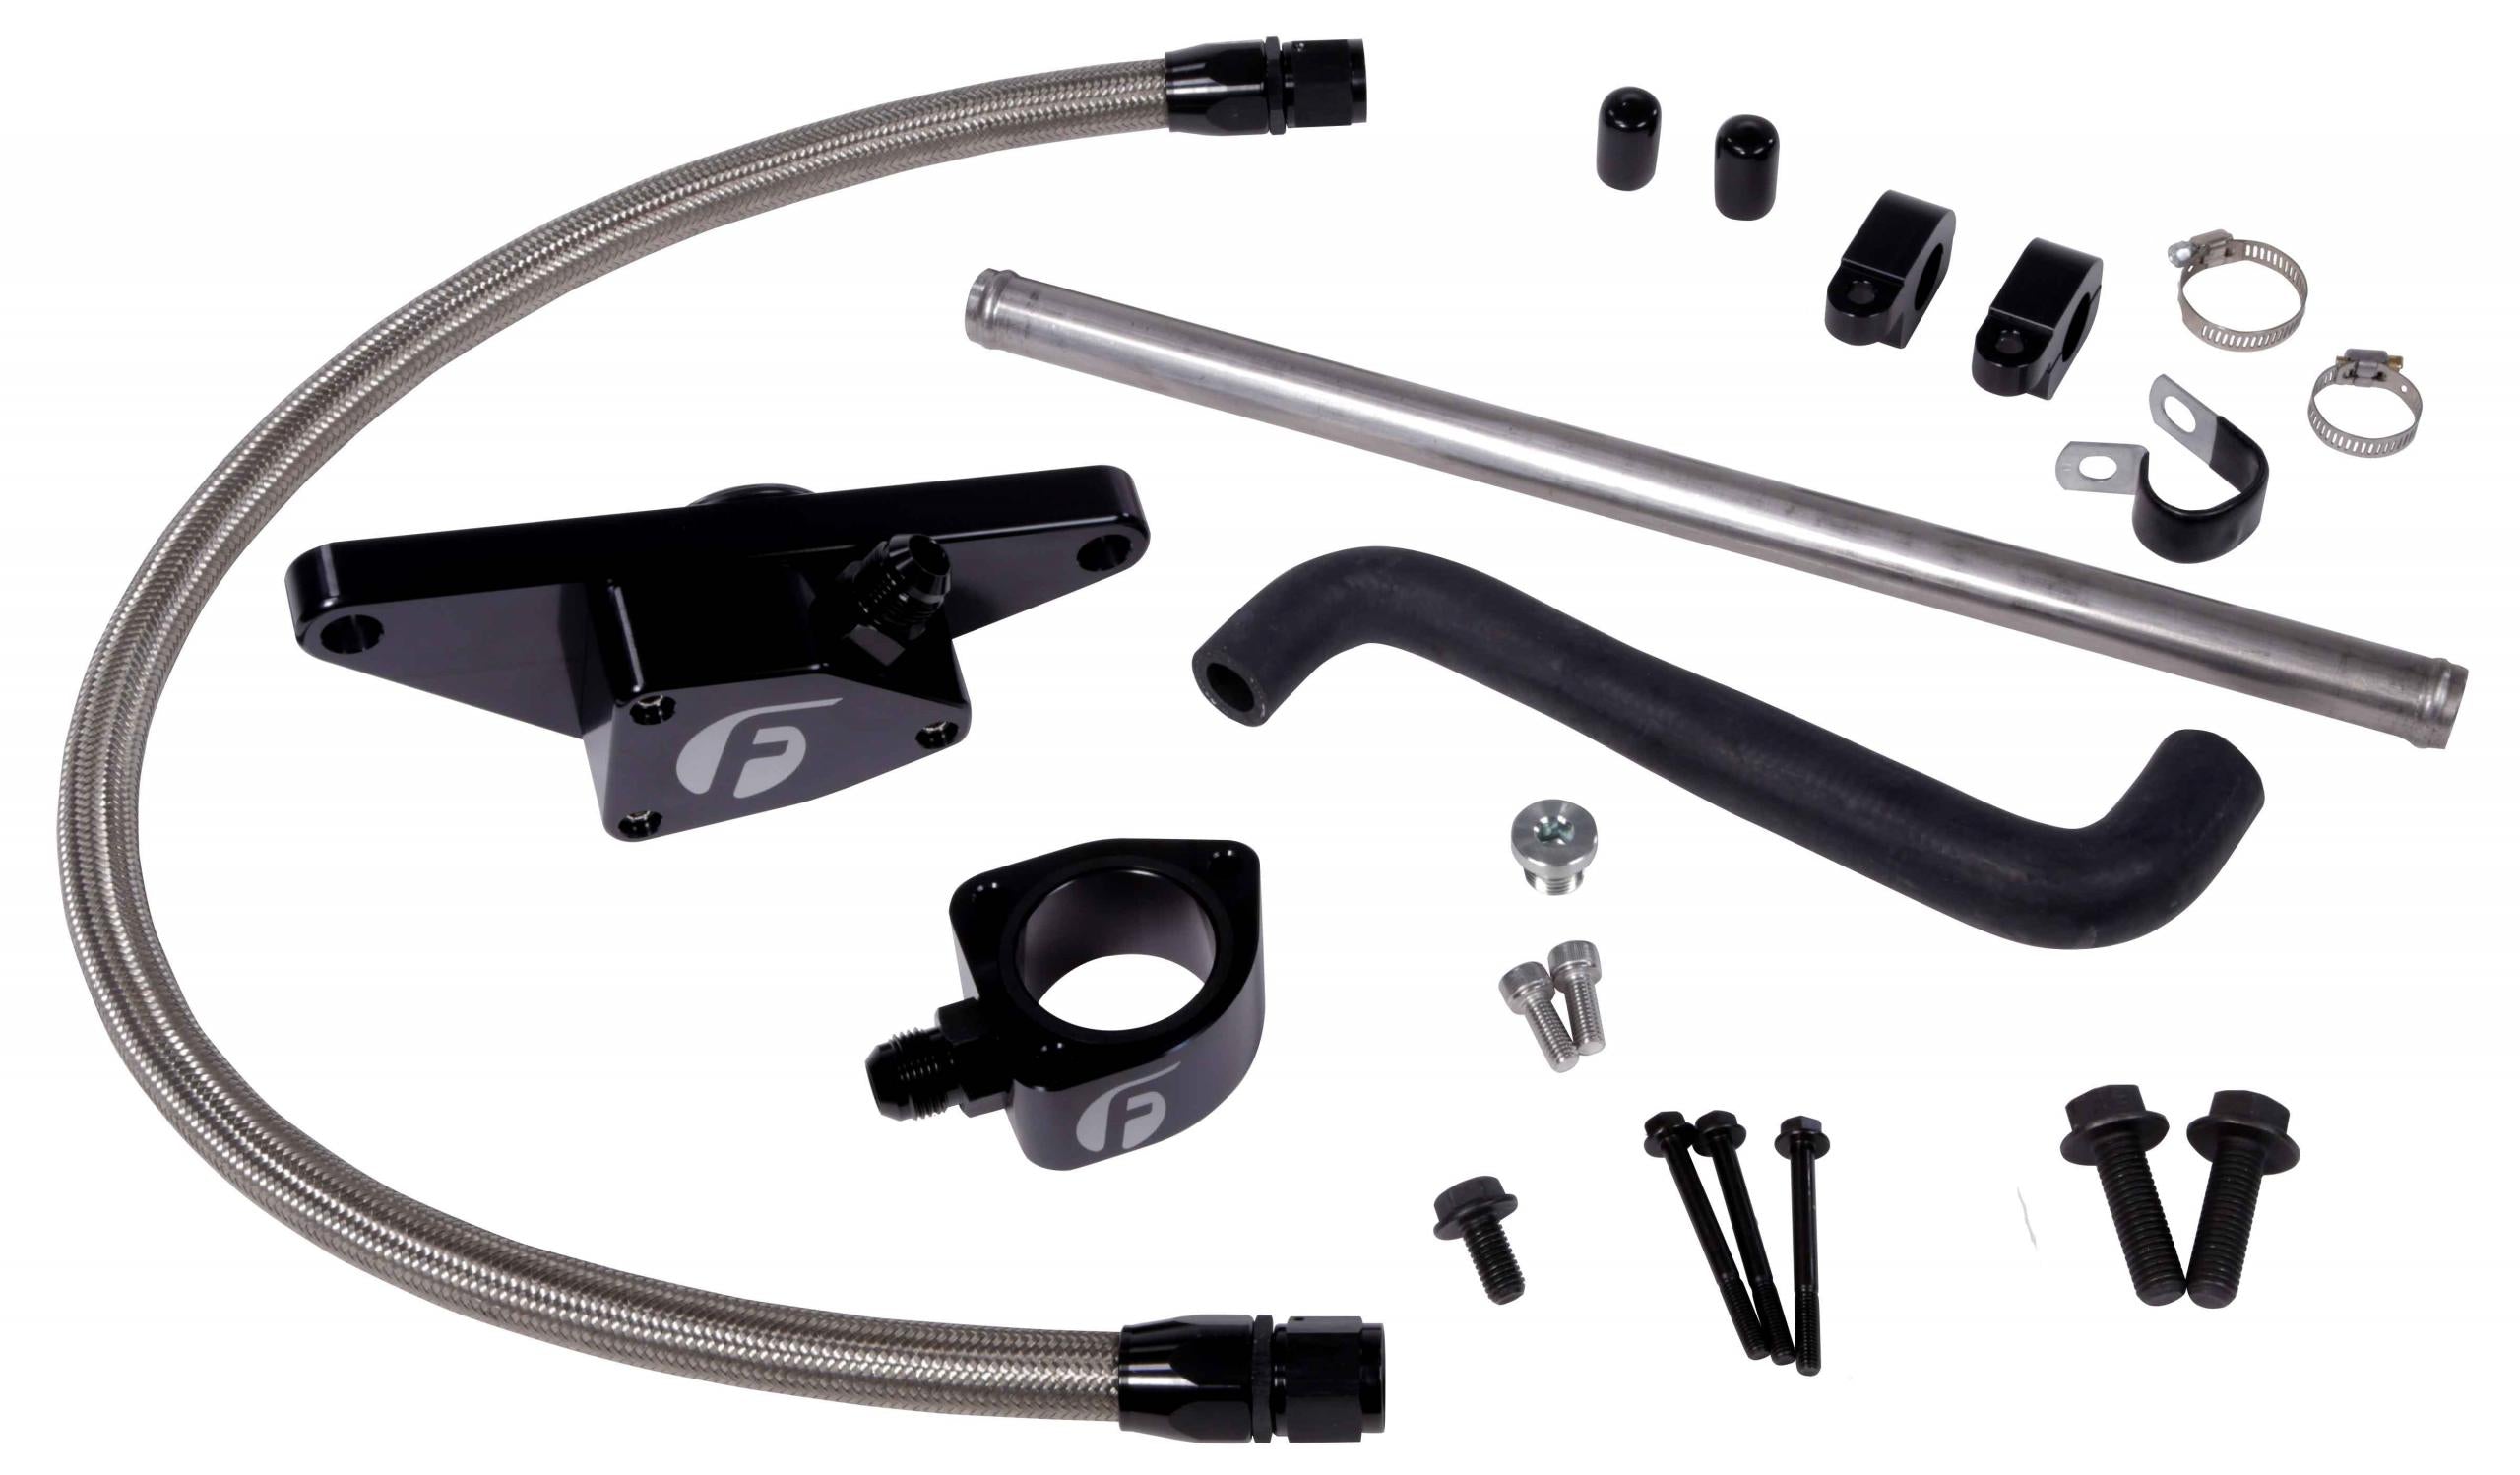 Cummins Coolant Bypass Kit 003-05 Auto Trans with Stainless Steel Braided Line Fleece Performance